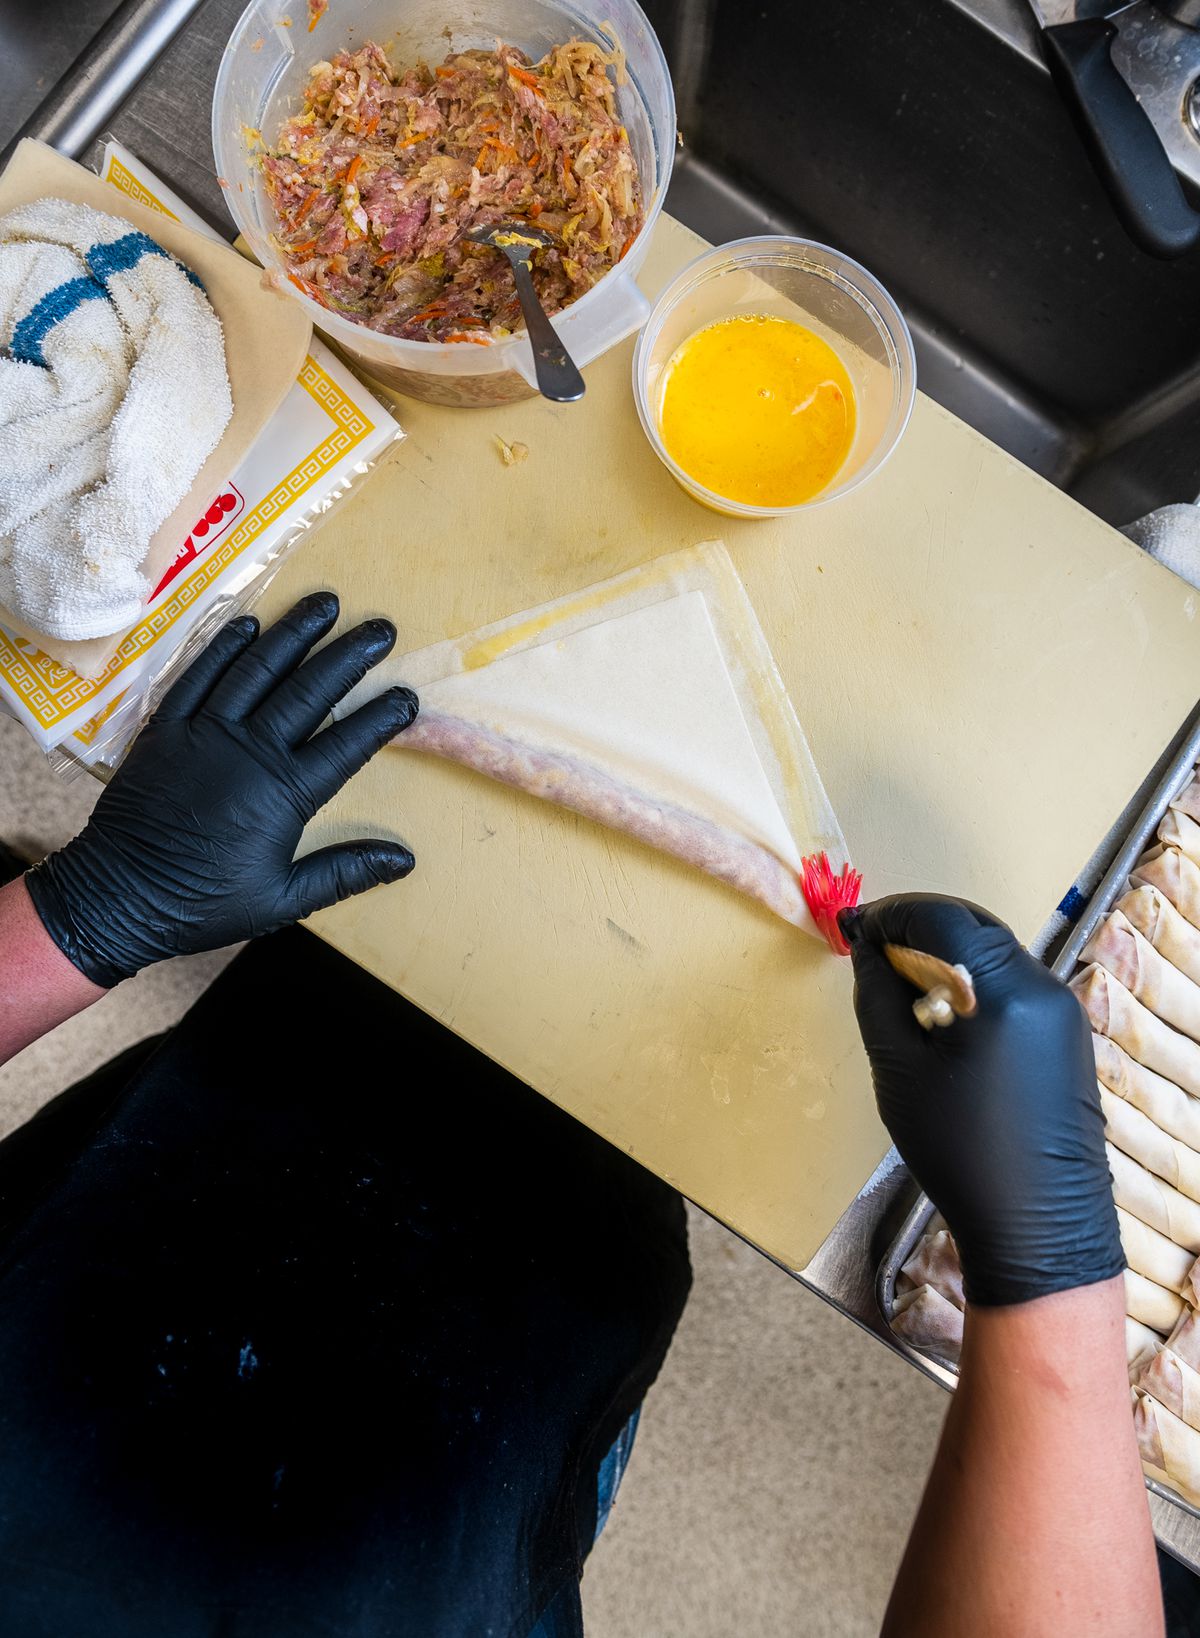 Javier Fernandez’s gloved hands roll a square wonton wrapper full of pork and shrimp to make lumpia, or Filipino egg rolls